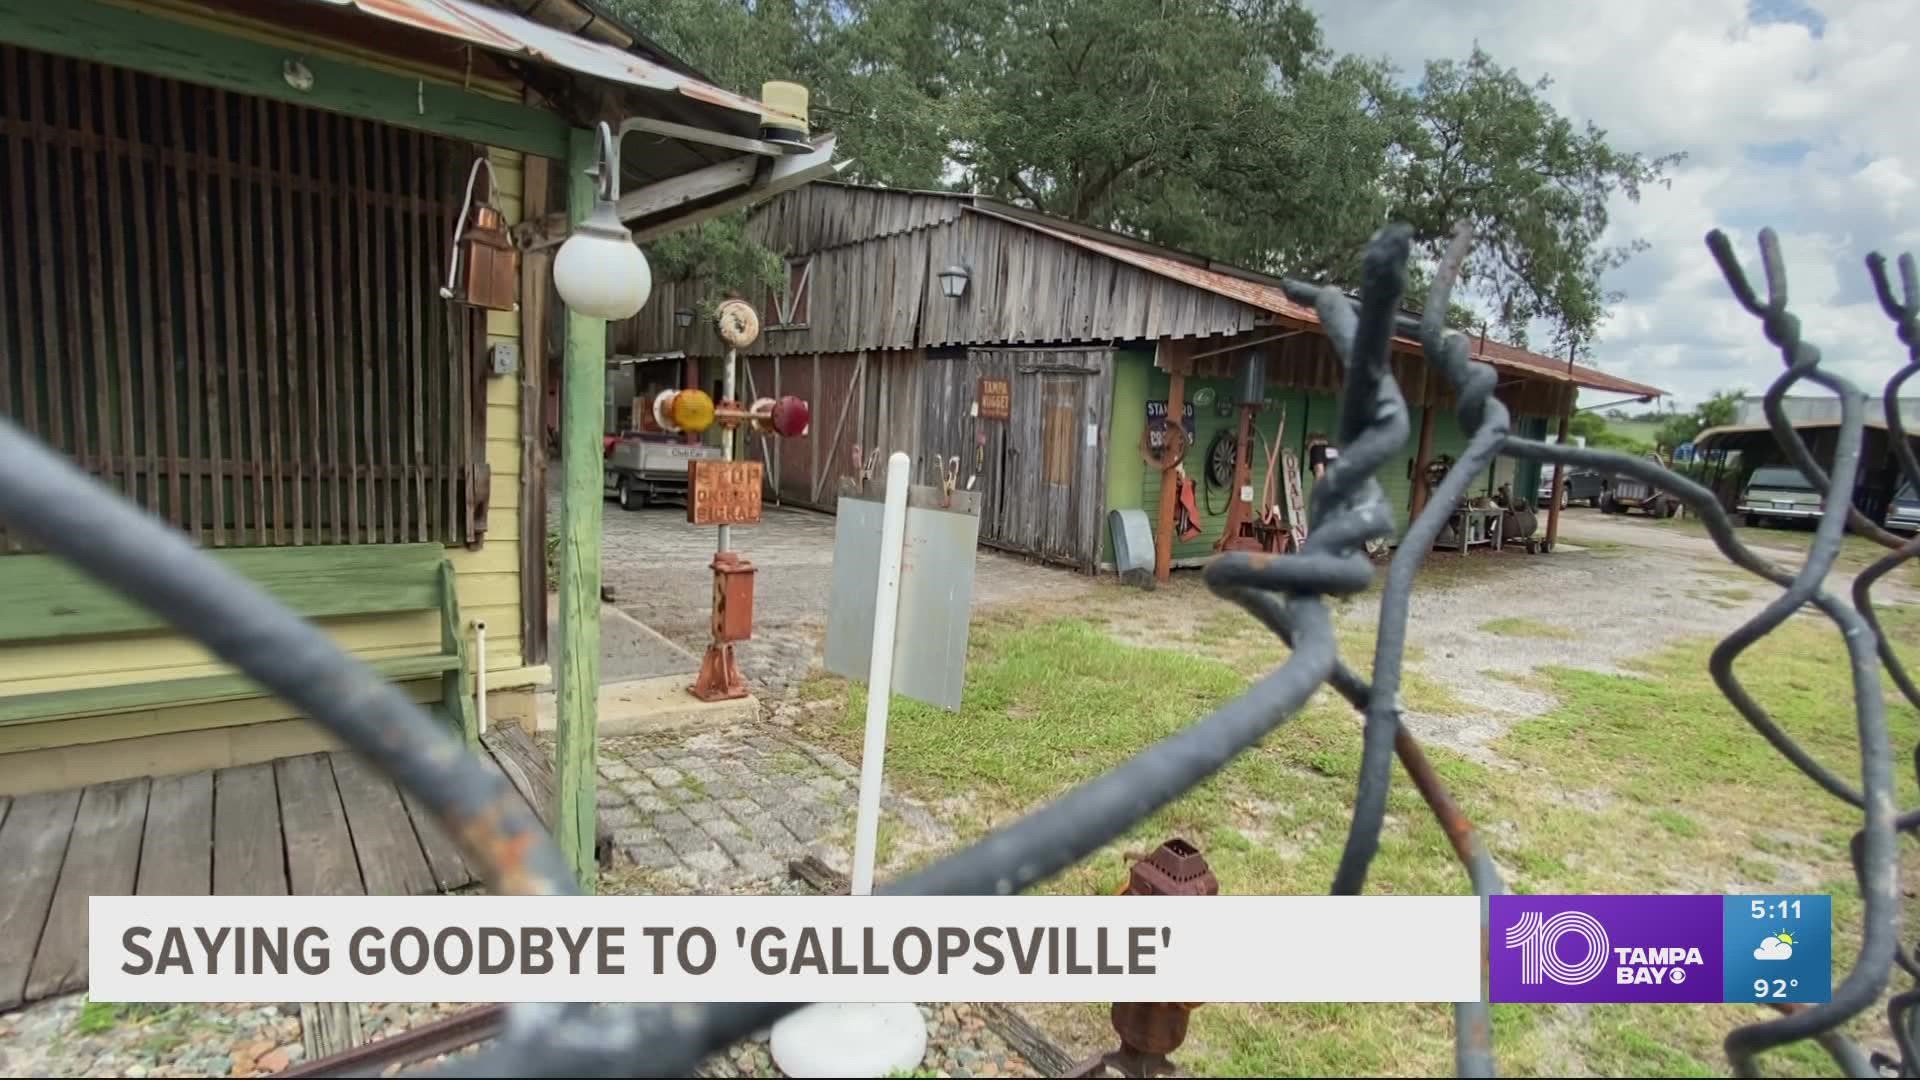 Its owner is saying goodbye to its Old West town after 42 years.